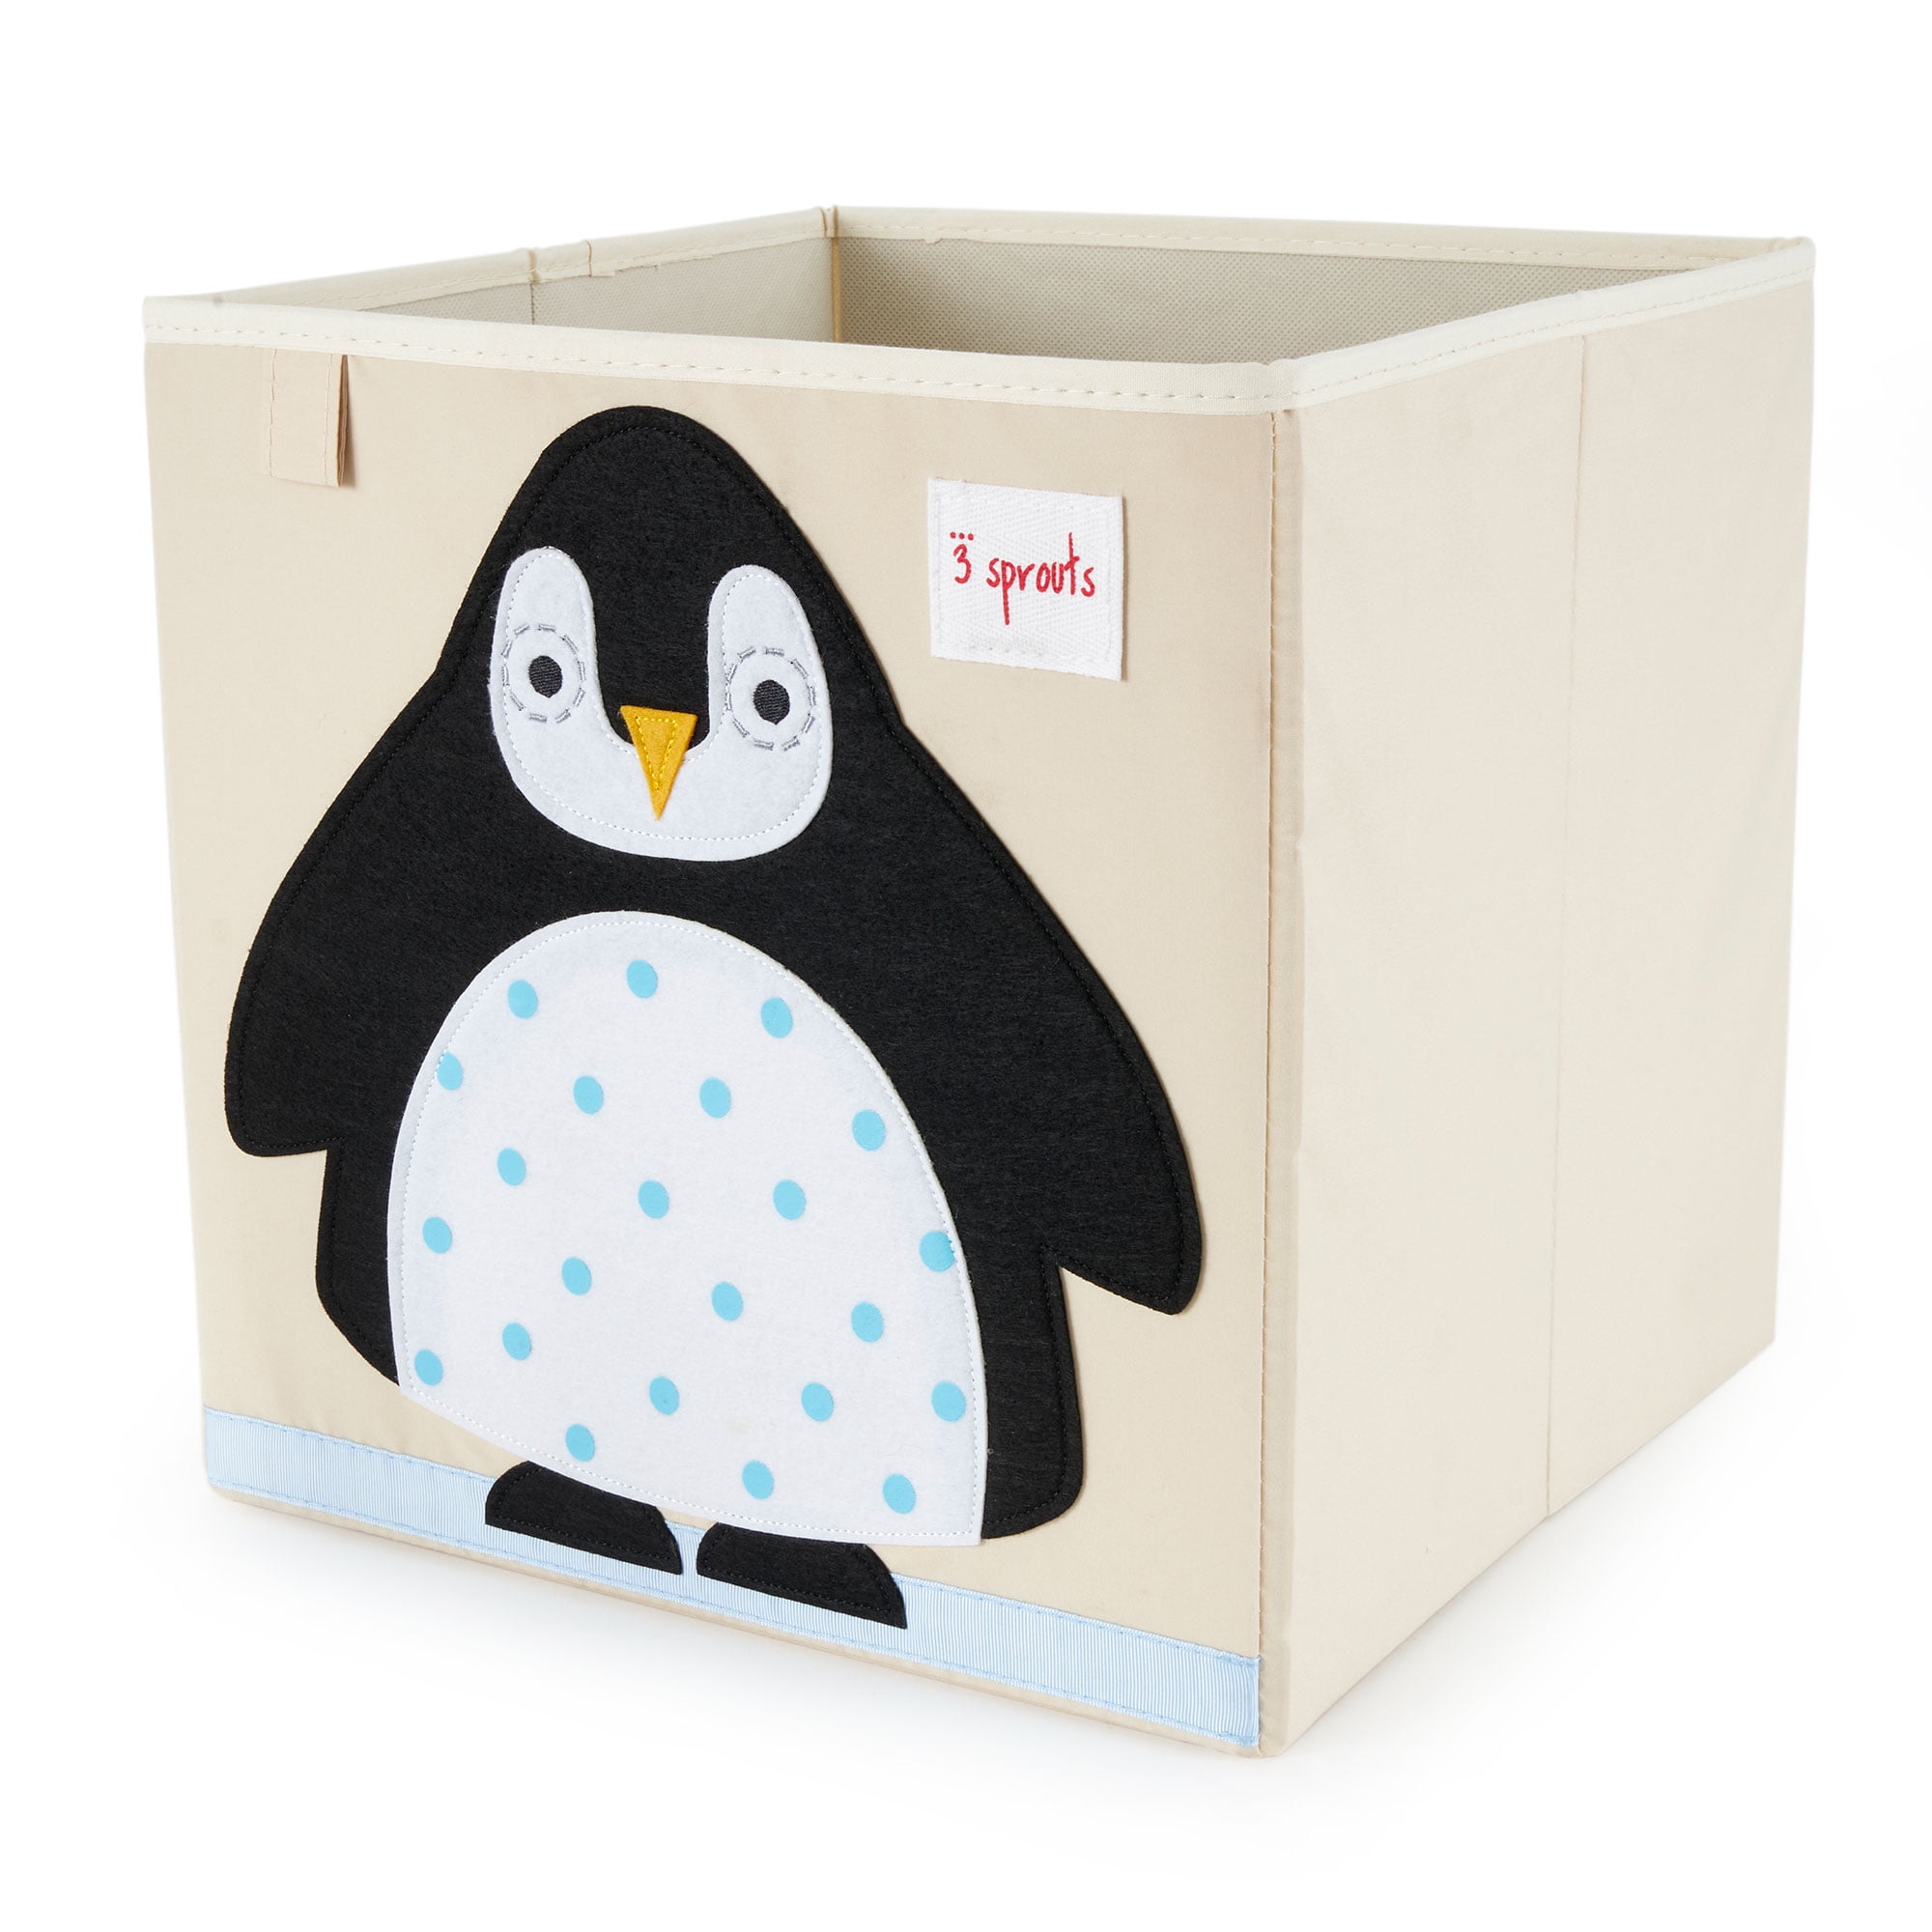  3 Sprouts Cube Storage Box - Organizer Container for Kids &  Toddlers, Peacock : Nursery Storage Baskets : Baby